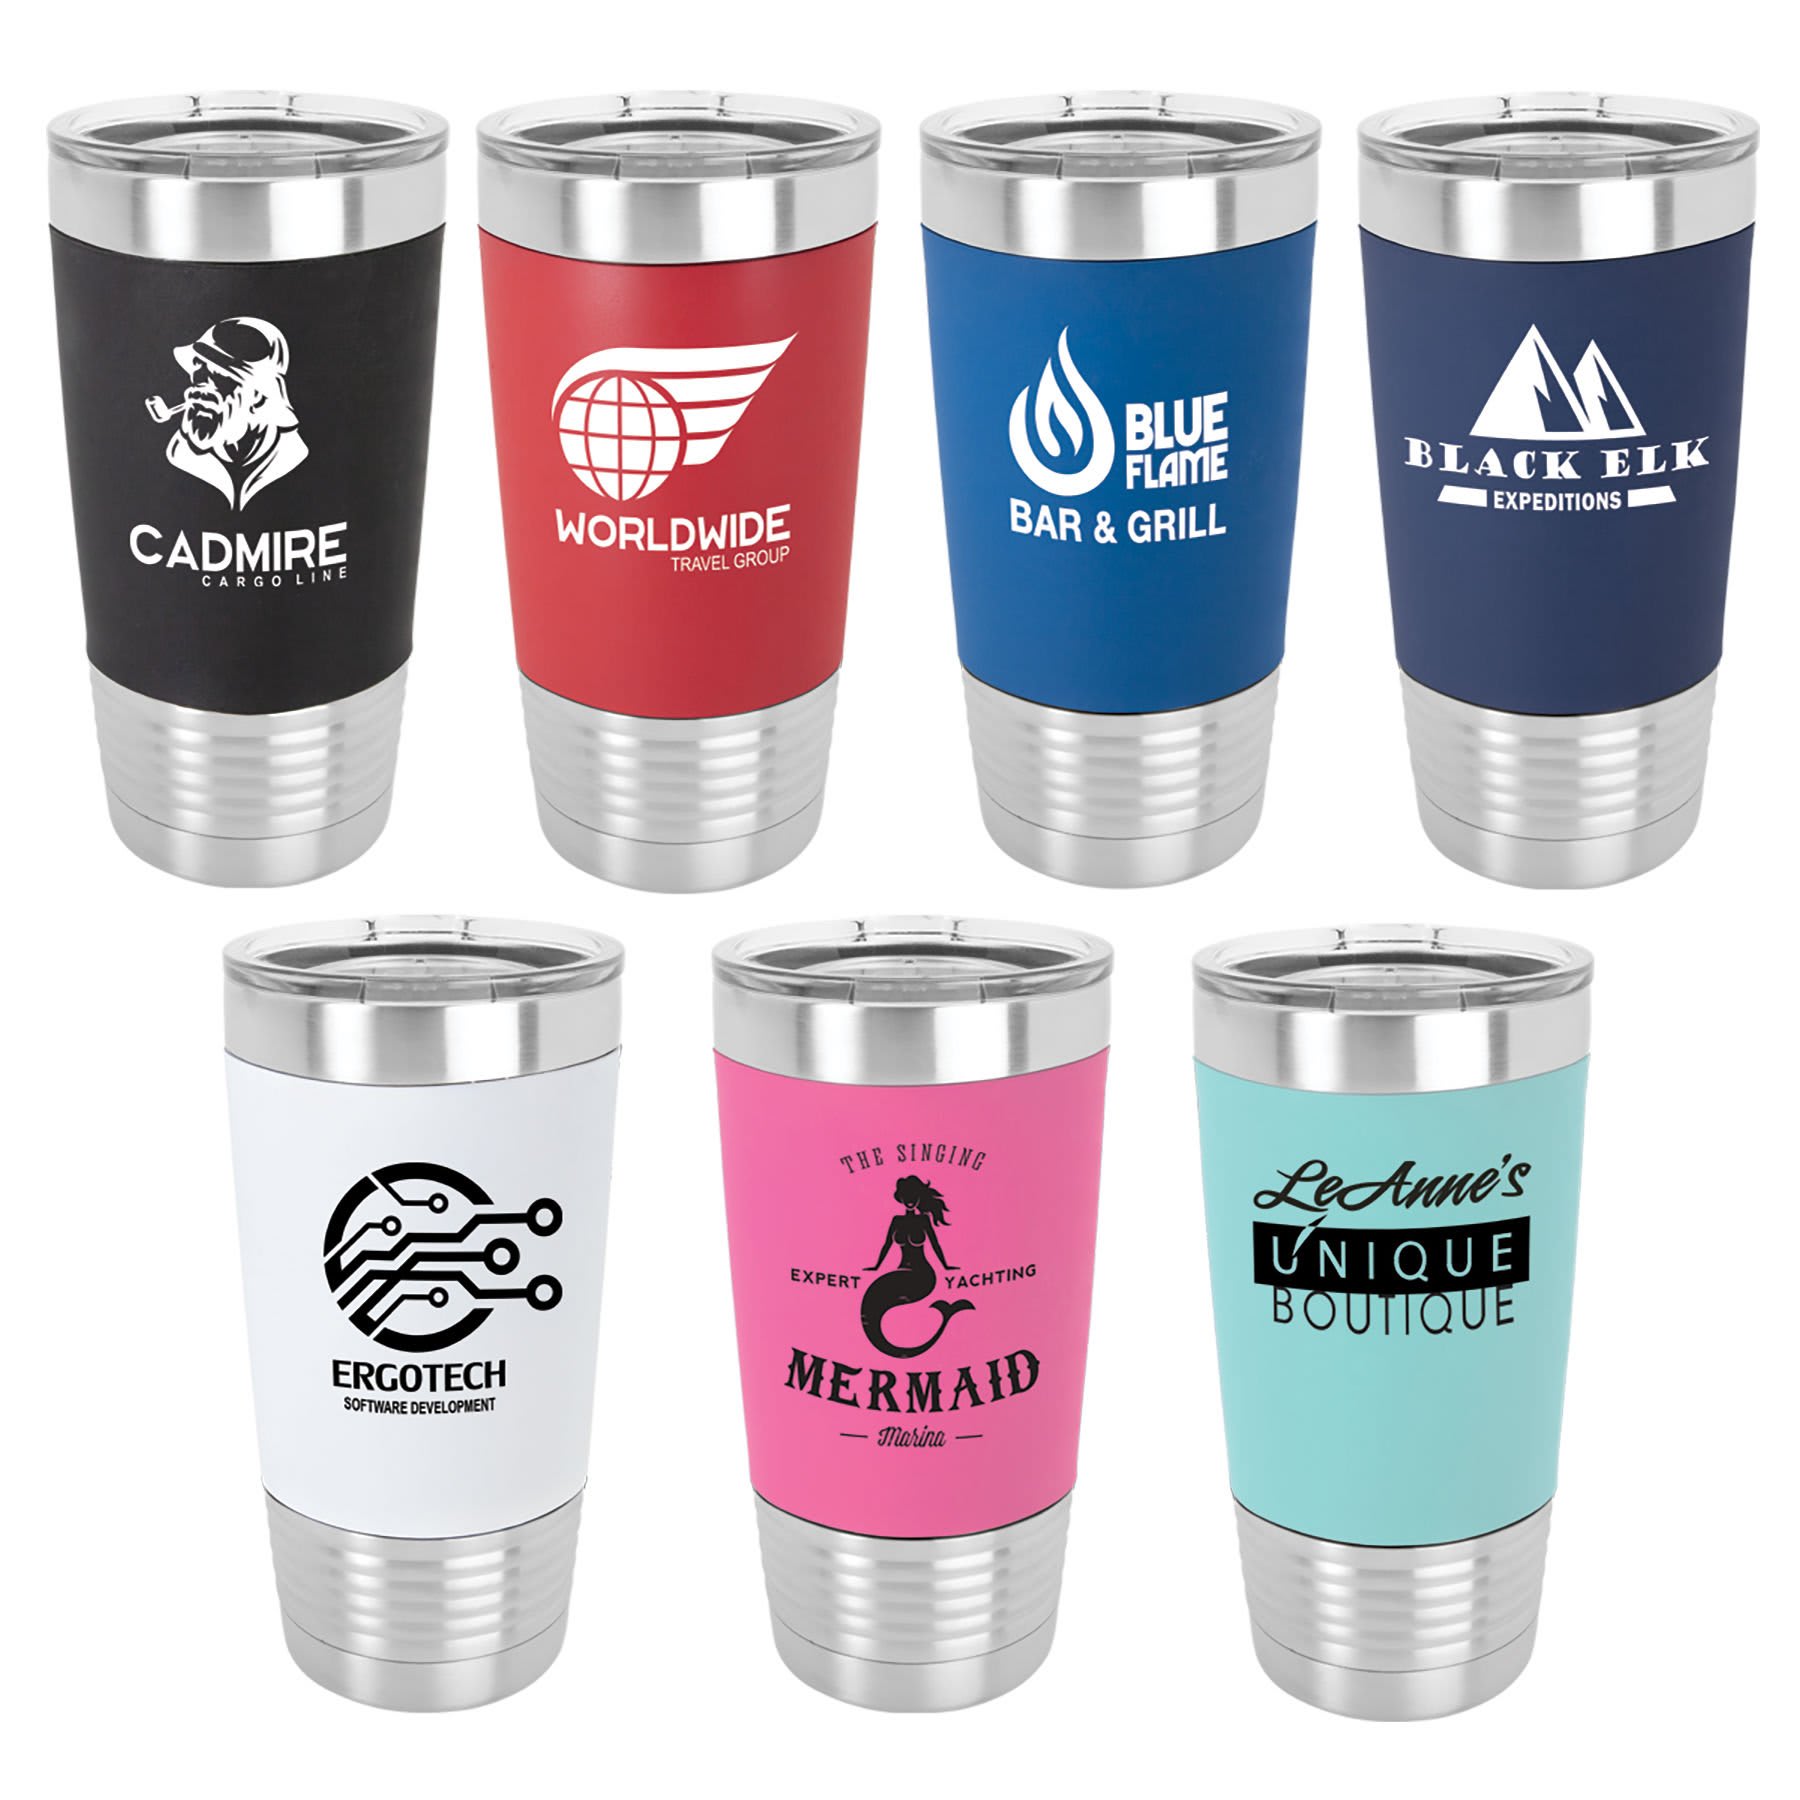 20 oz Vacuum Insulated Tumbler with Silicone Grip and "Free Engraving"